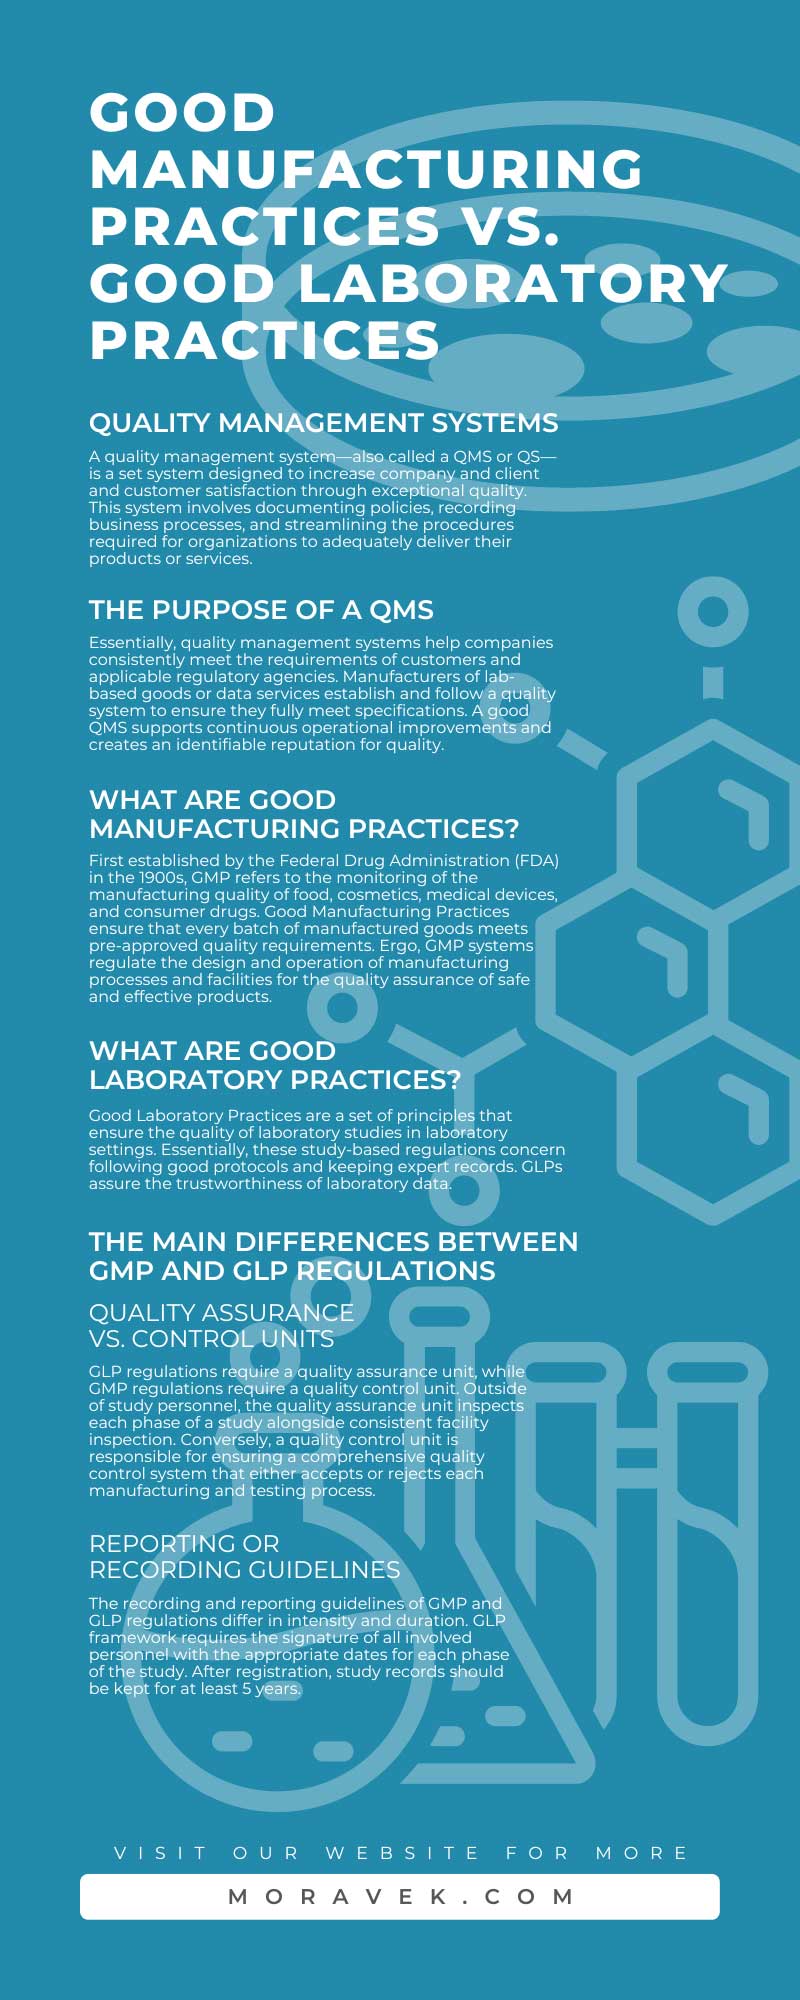 Good Manufacturing Practices vs. Good Laboratory Practices
